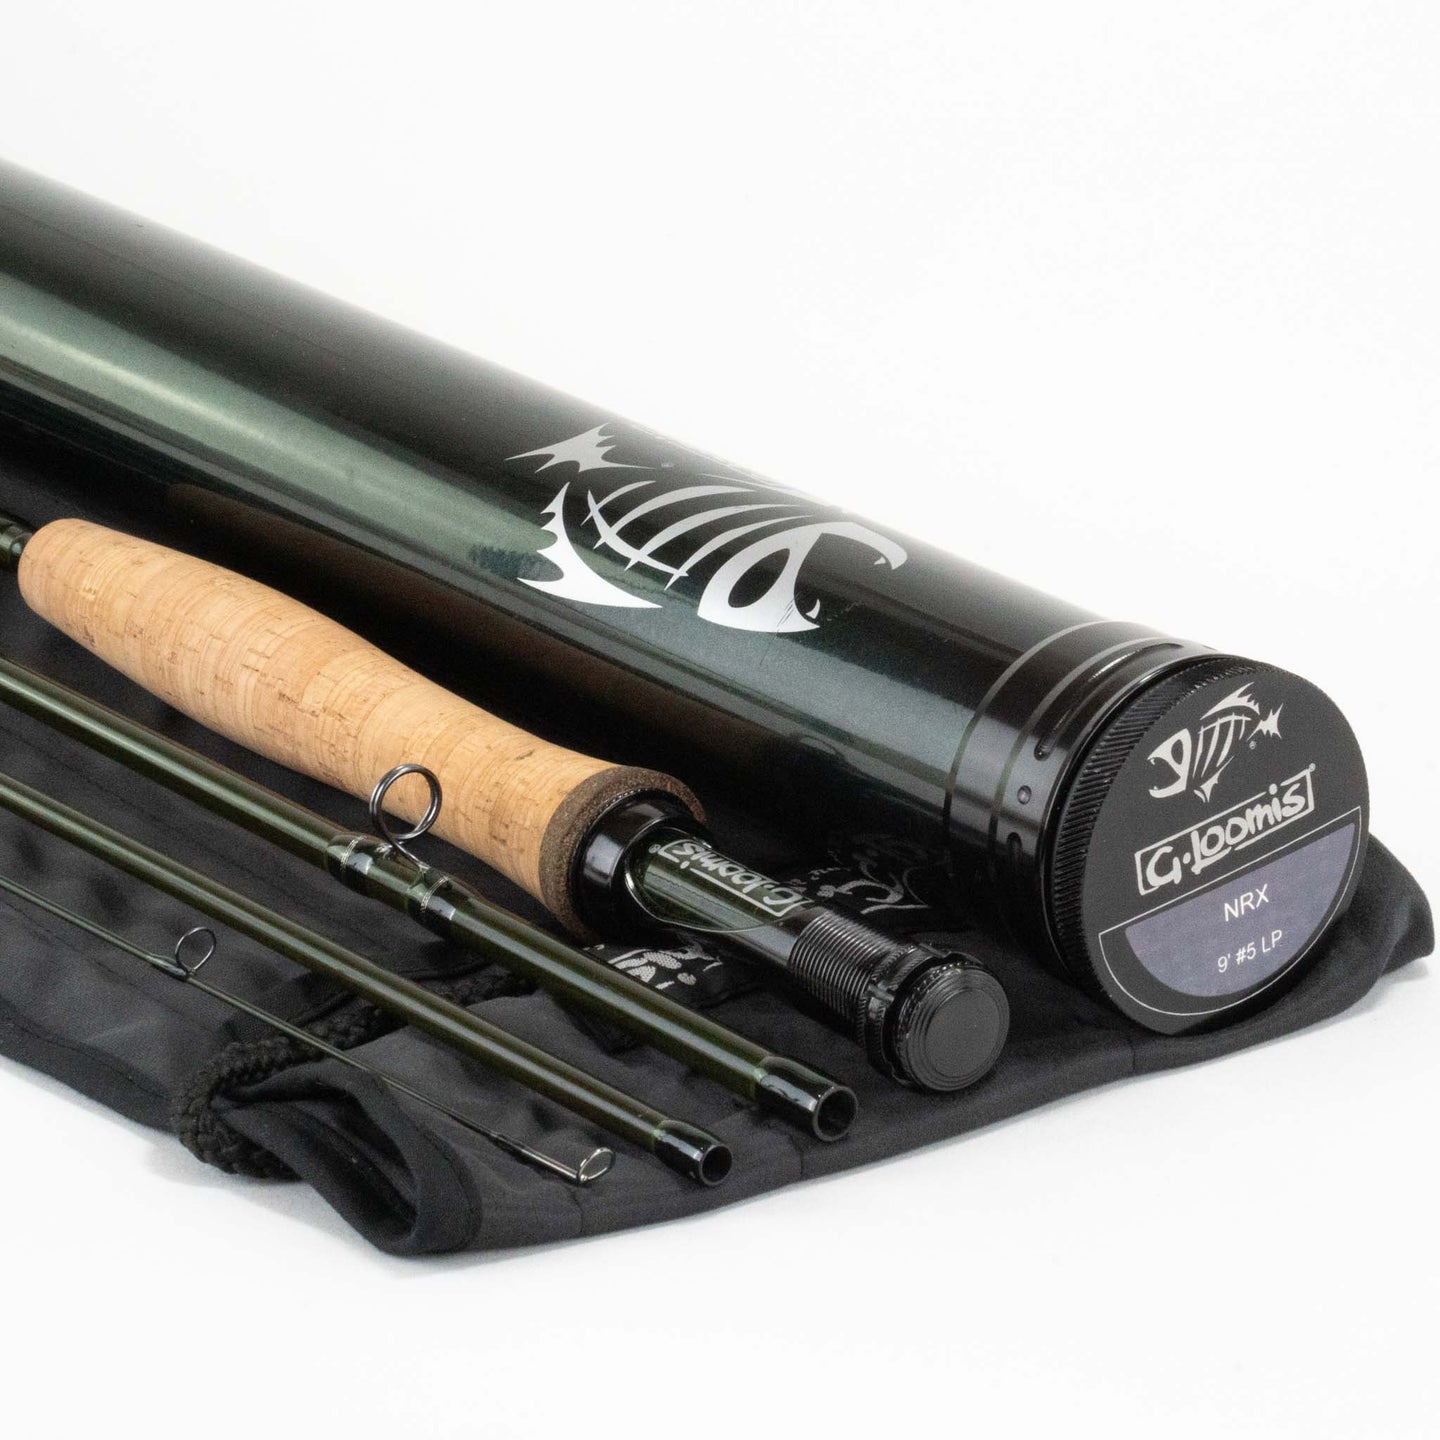 GLoomis NRX LP 590-4 Fly Rod - 5wt 9ft 0in 4pc